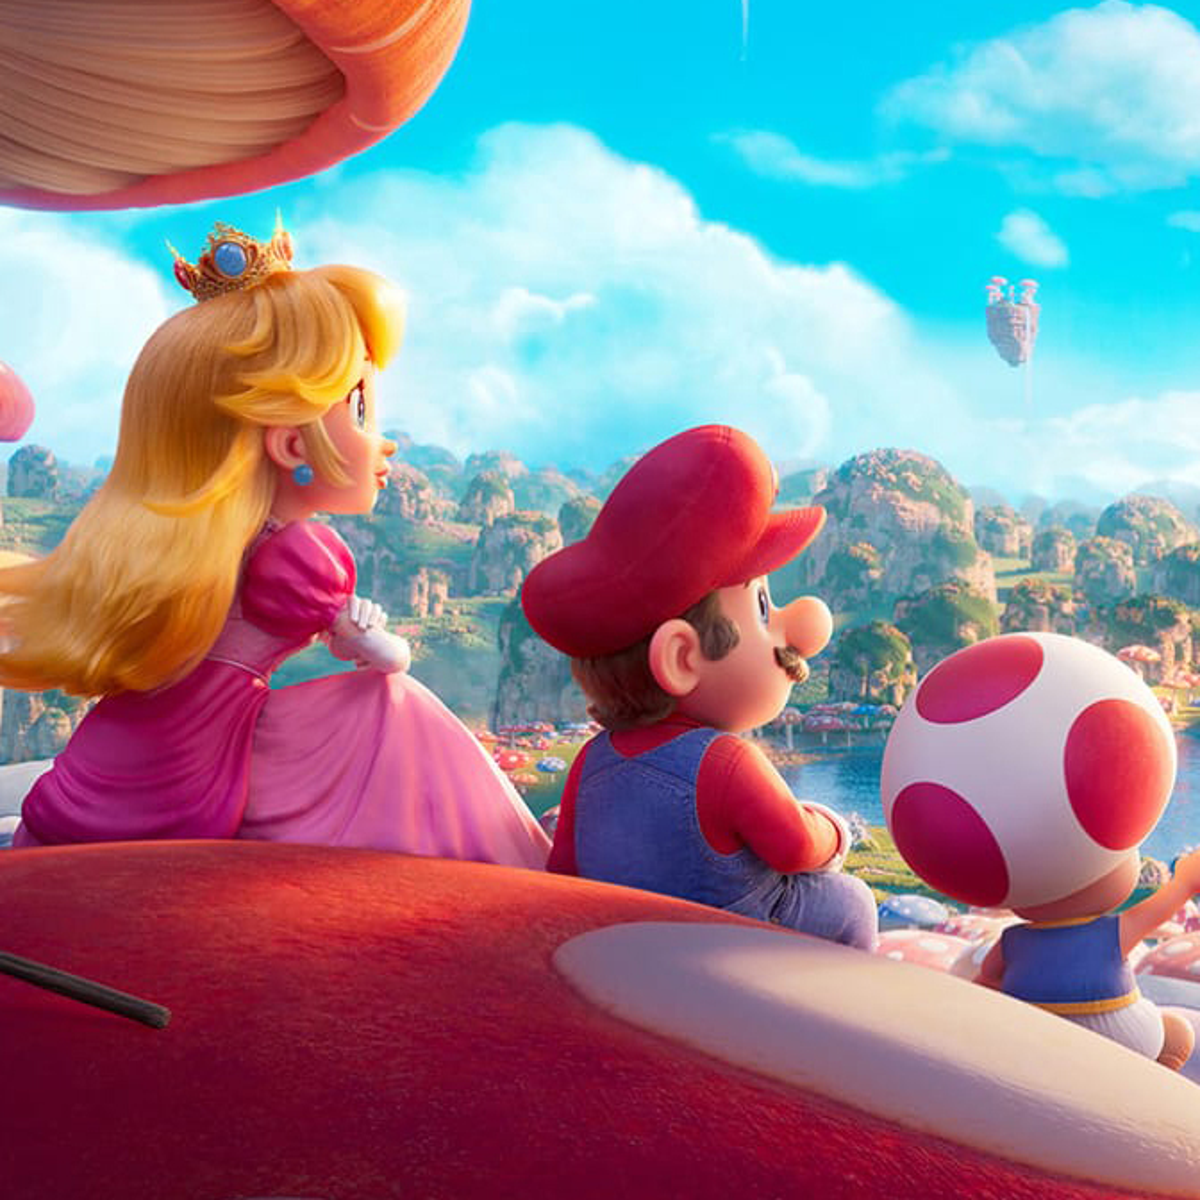 The Super Mario Bros. Movie pulls in $500m globally